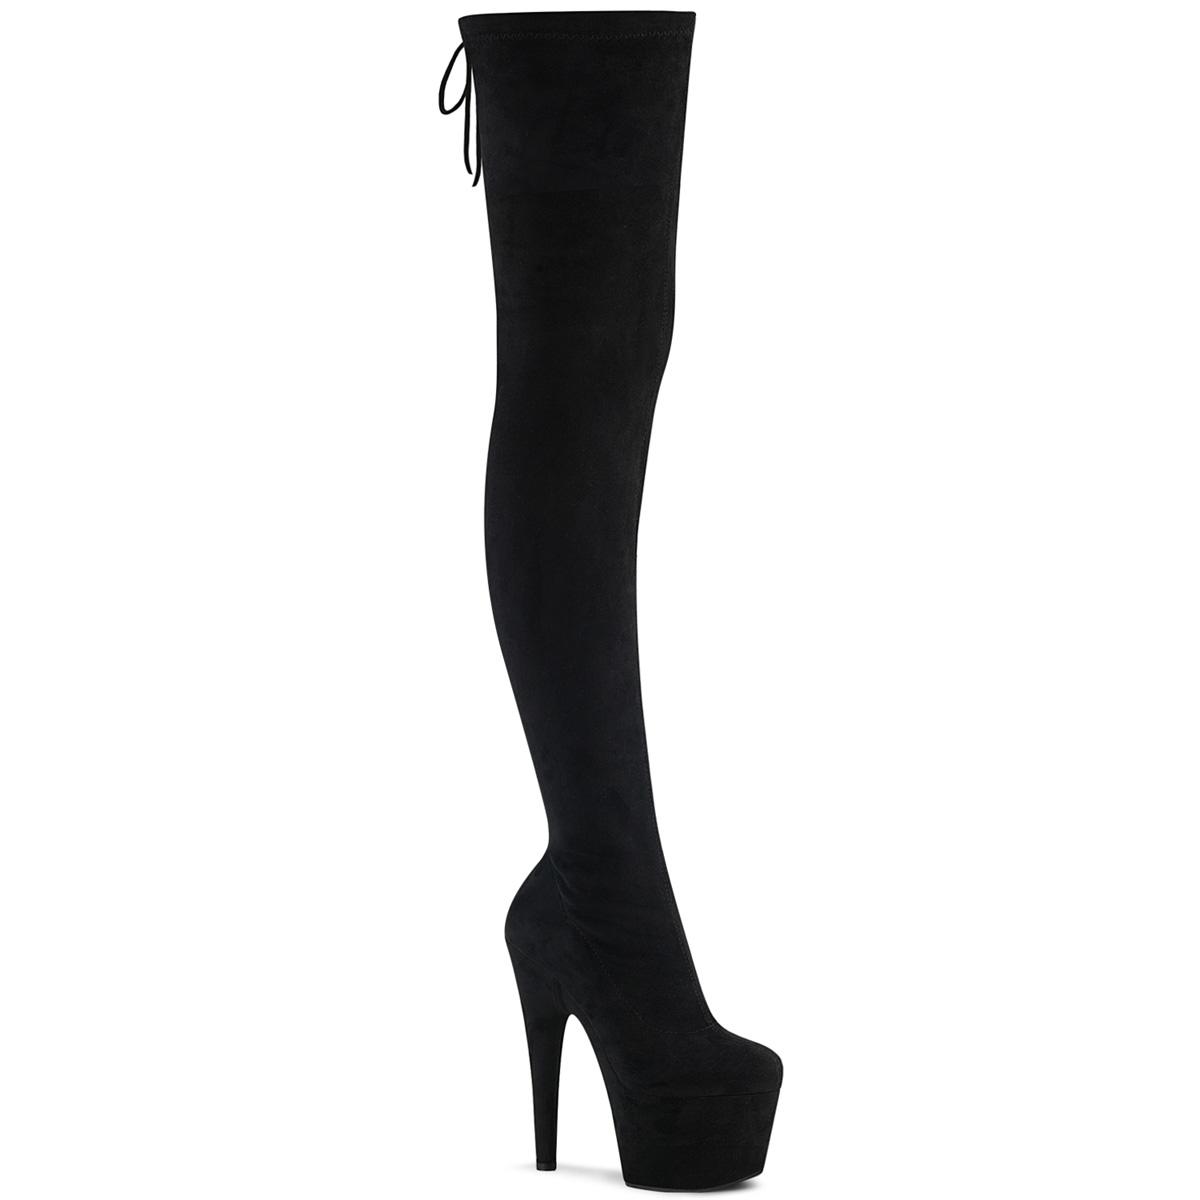 Black Suede Over The Knee Pull On Boots